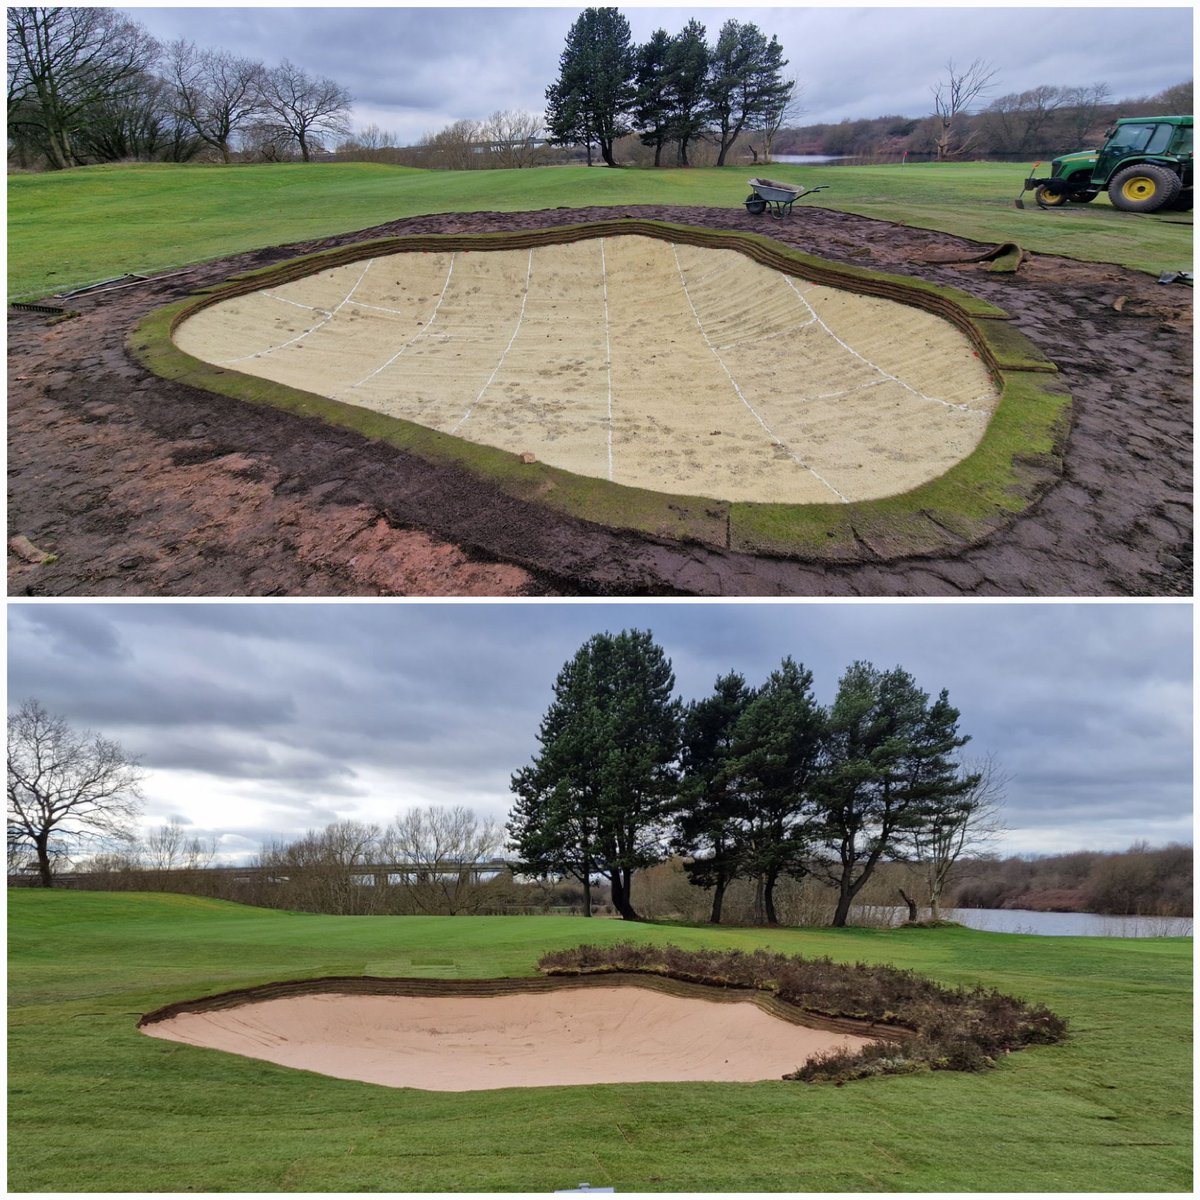 The new 5th bunker! Old bunker used to flood & sides needed repair. New bunker moved to the left slightly, drainage added with 2 grass hollows to the right & heather added to the side edge Big thanks to @BenSmith888 from @EcoBunkerLtd for installation of their new bunker liner